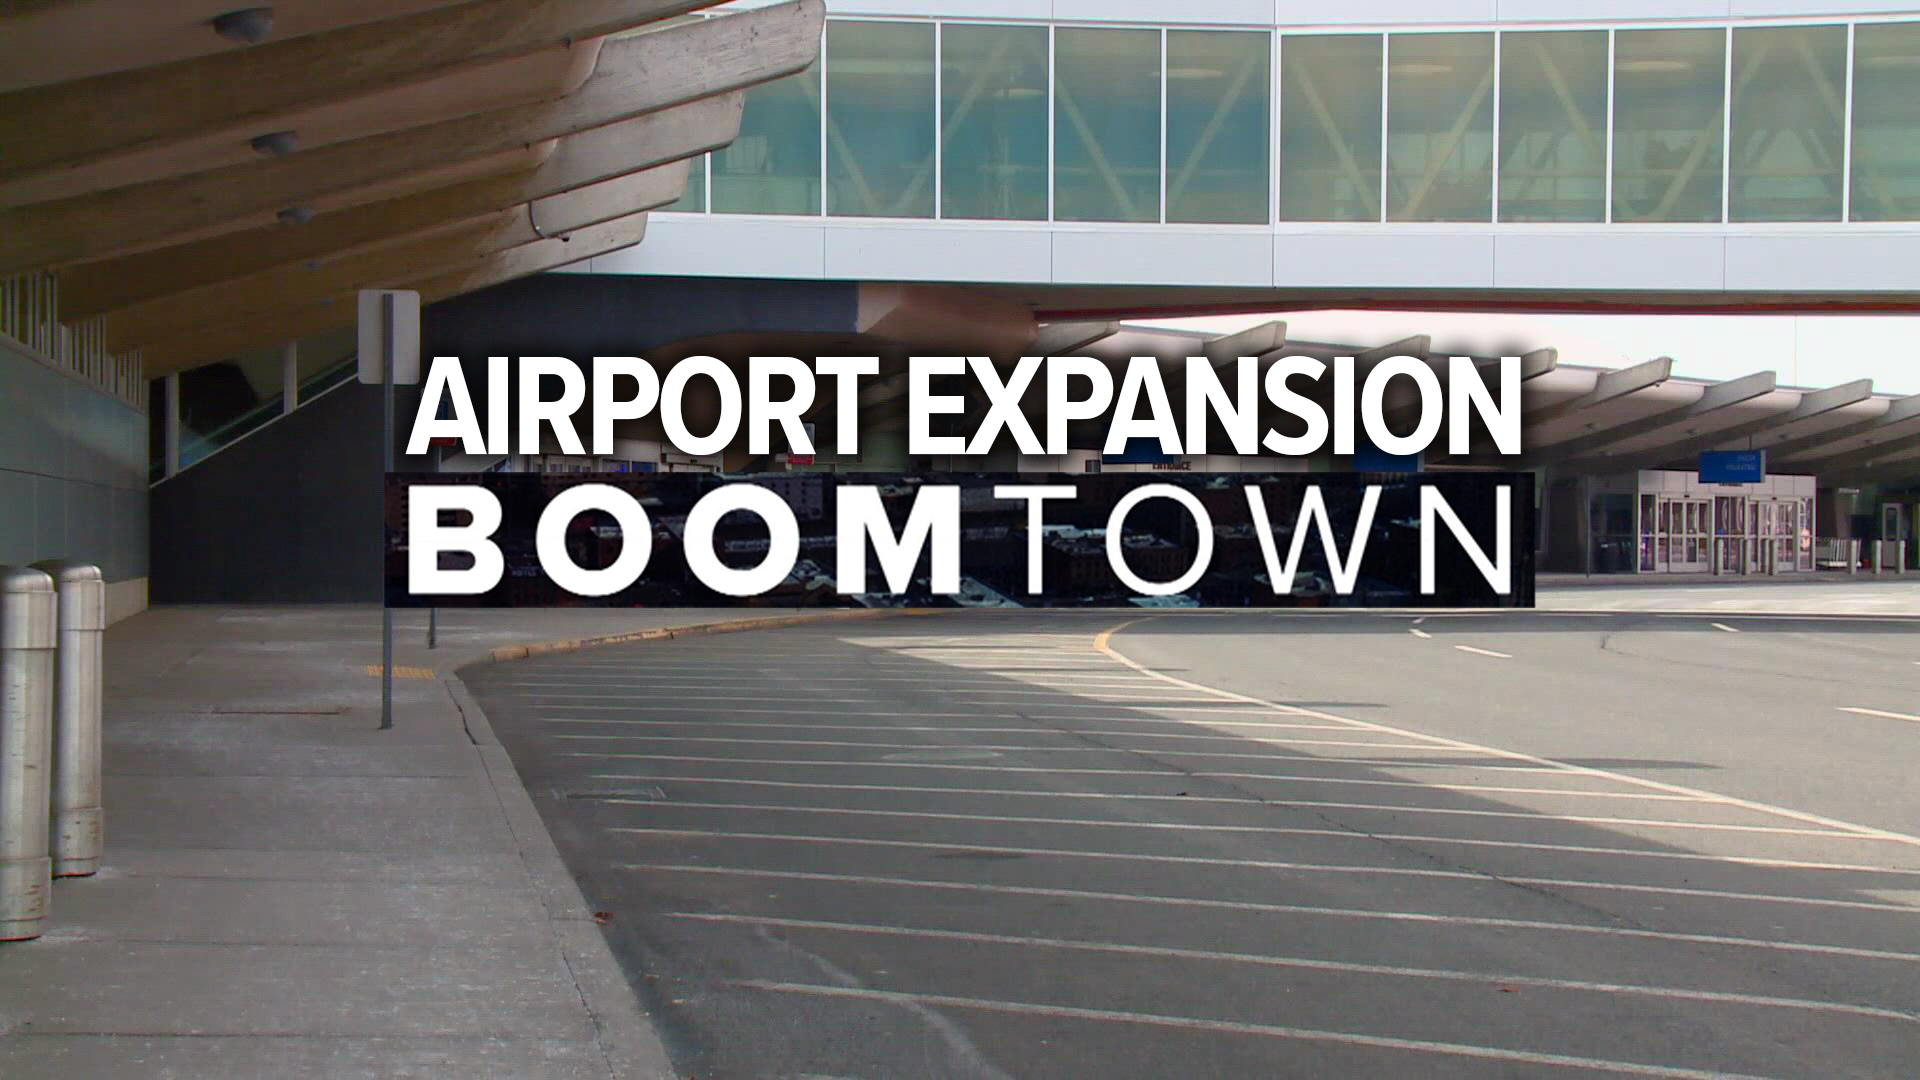 Spokane International Airport applied for an Airport Terminal Grant (ATP), which provides $25 million for airport infrastructure nationwide.